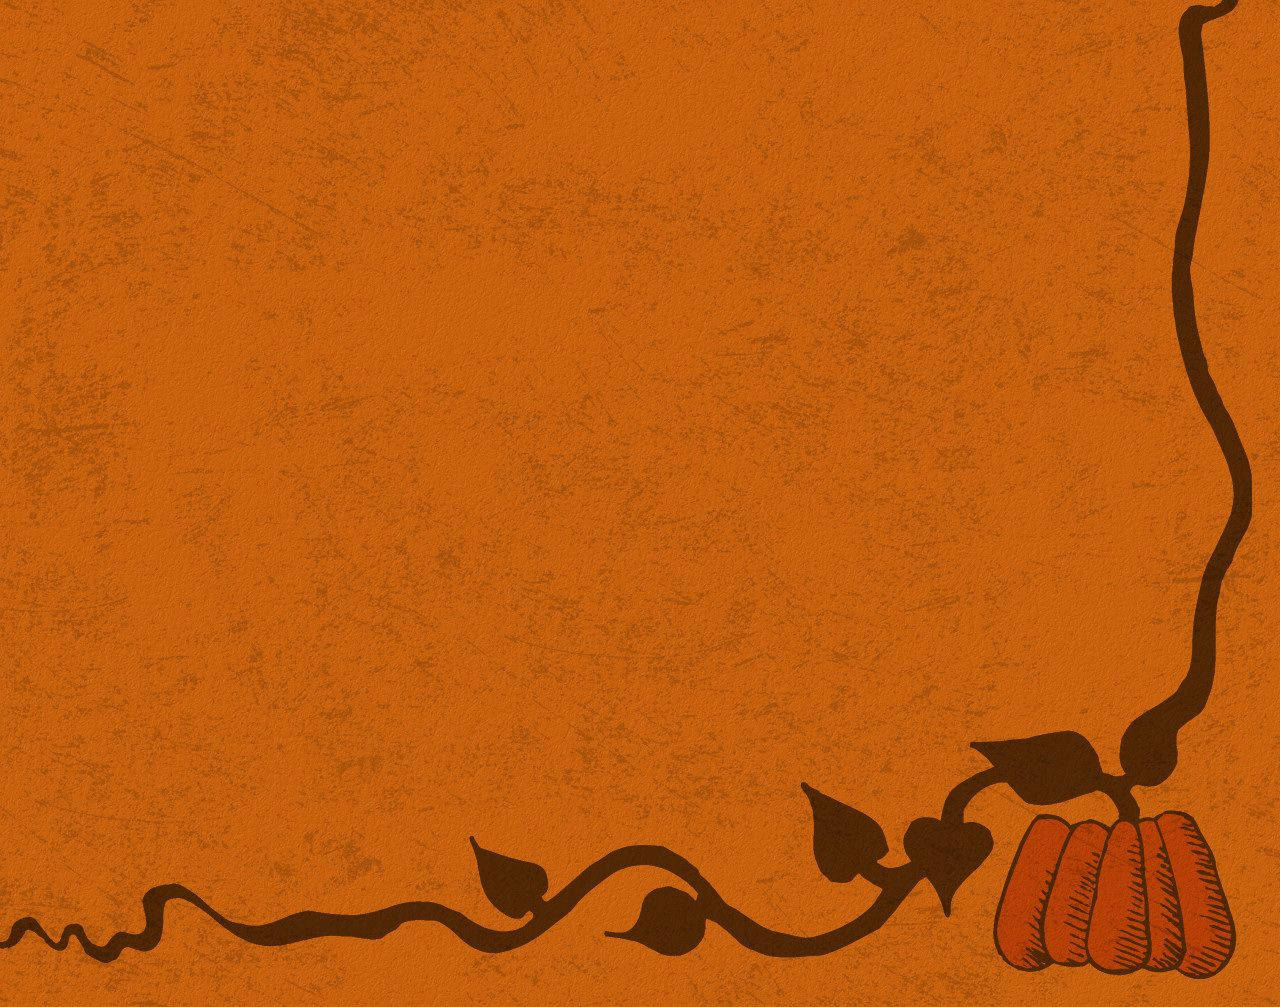 1280X1007 Thanksgiving Wallpaper and Background